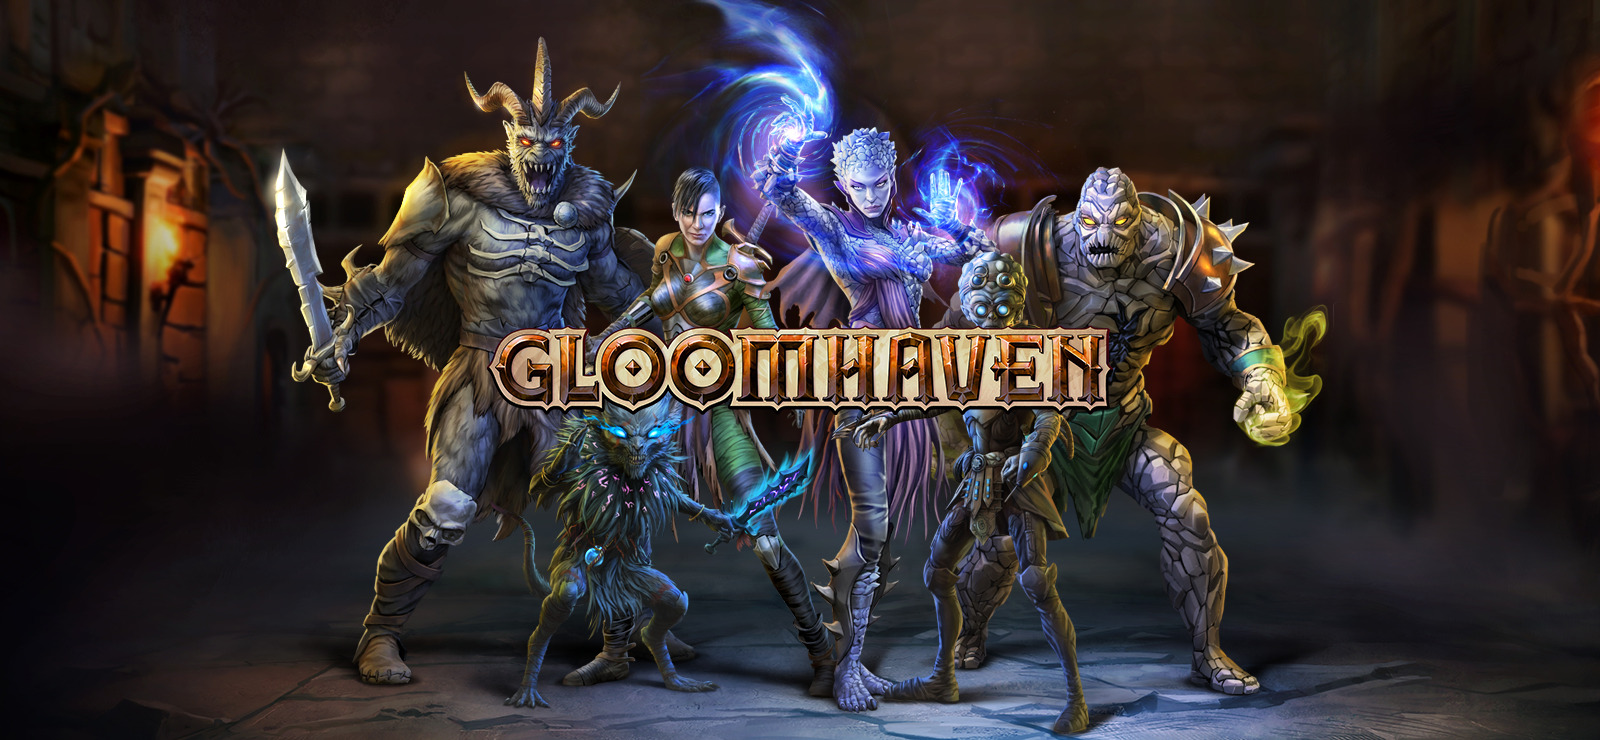 Gloomhaven  Download and Buy Today - Epic Games Store